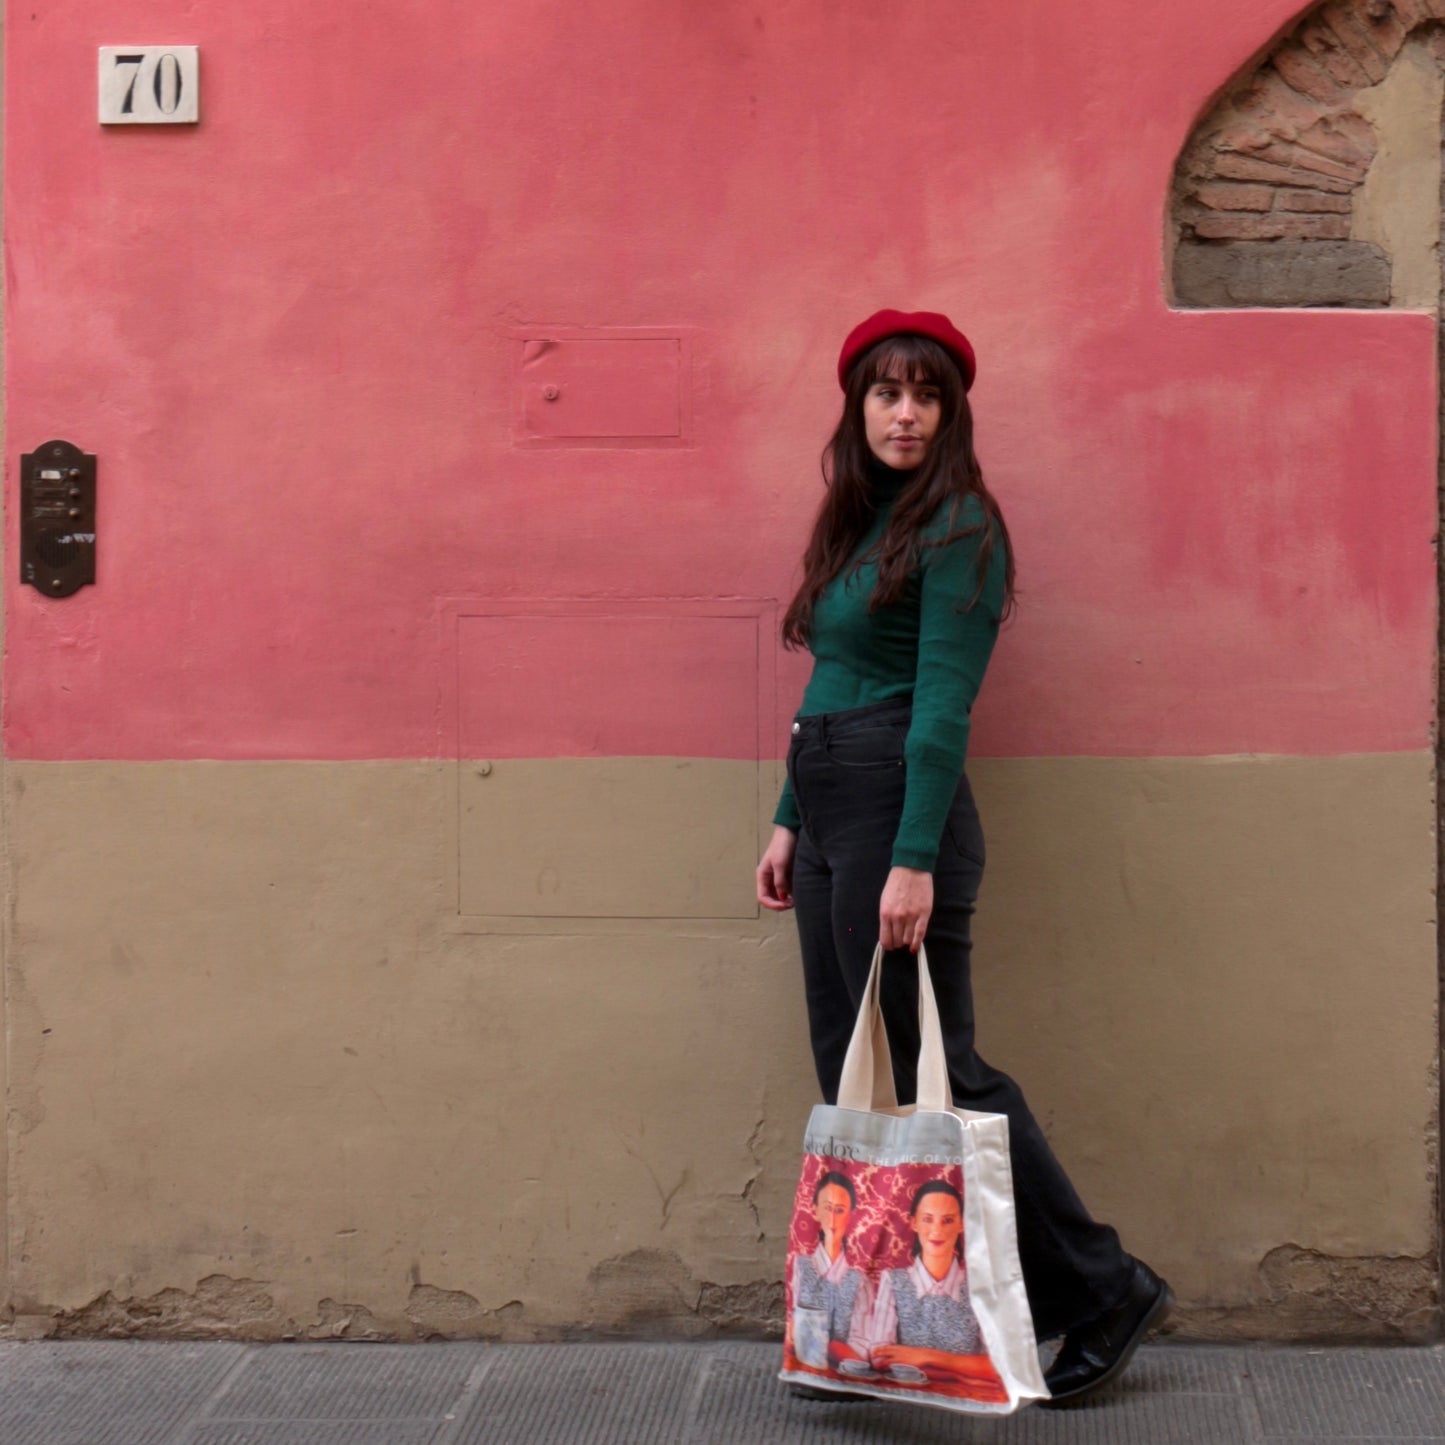 The Selvedge Tote, Issue 34 Romance